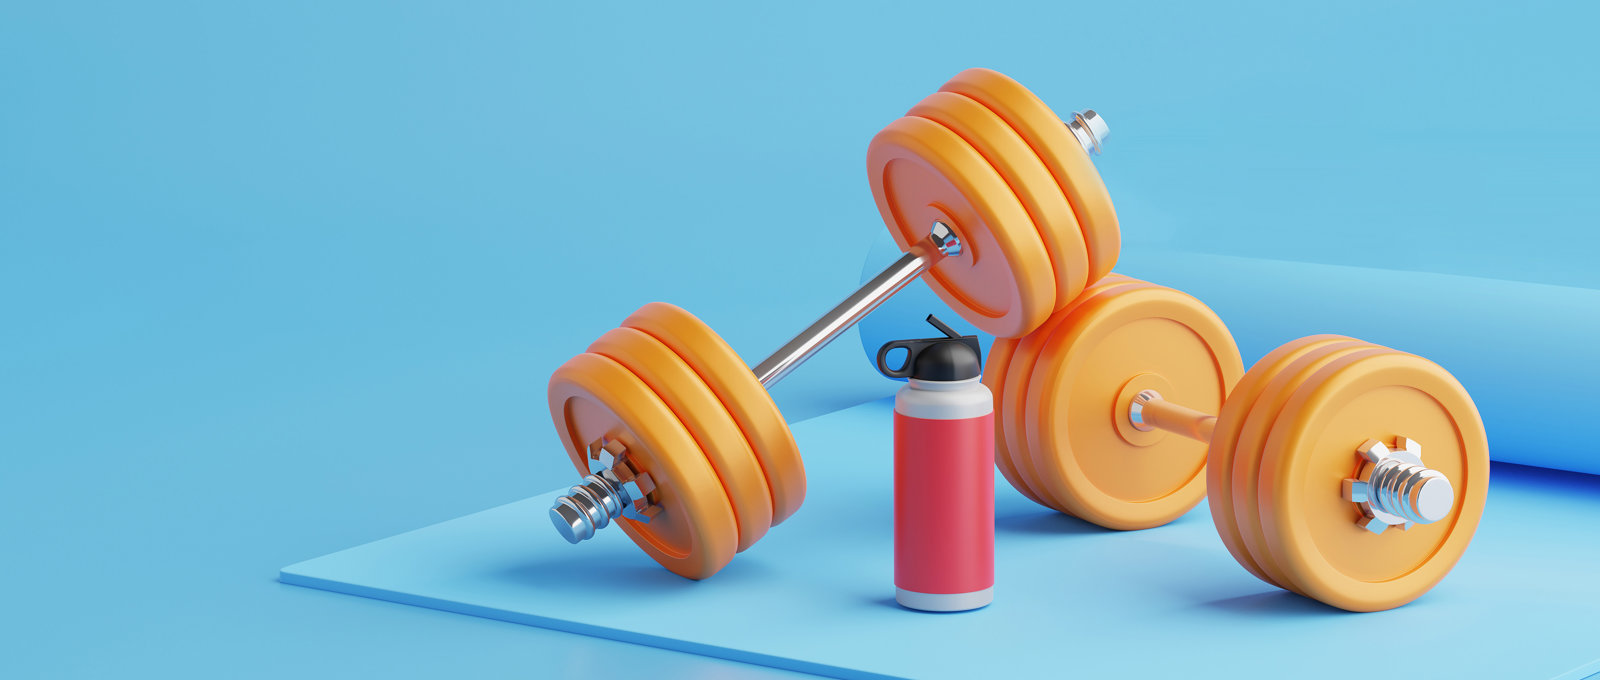 Photo of some exercise weights and a water bottle lying on a blue exercise mat against a blue background